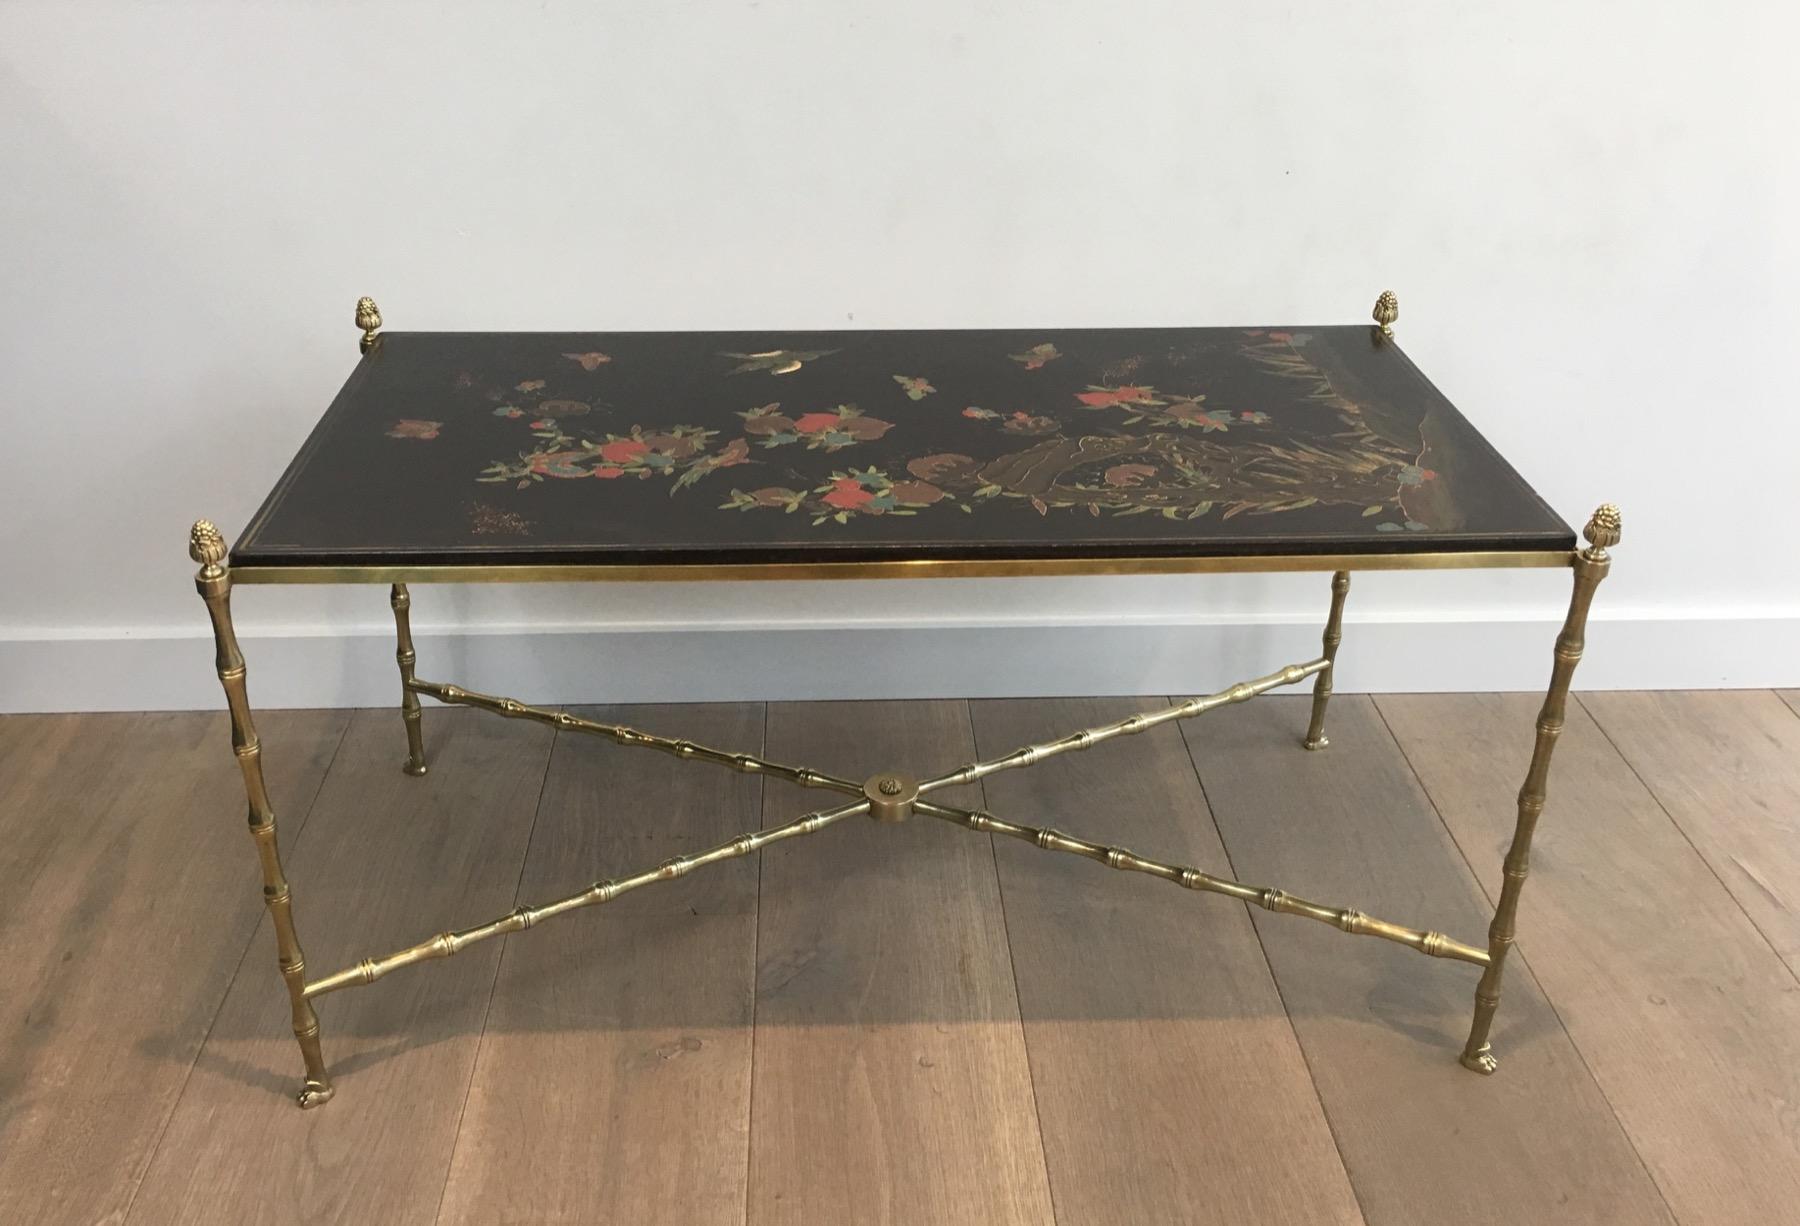 Maison Bagués. Rare Neoclassical Bronze Coffee Table with Faux-Bamboo and Claw Feet Base. Lacquered Wood Top with Chinoiseries. Beautiful Piece. French. Circa 1940